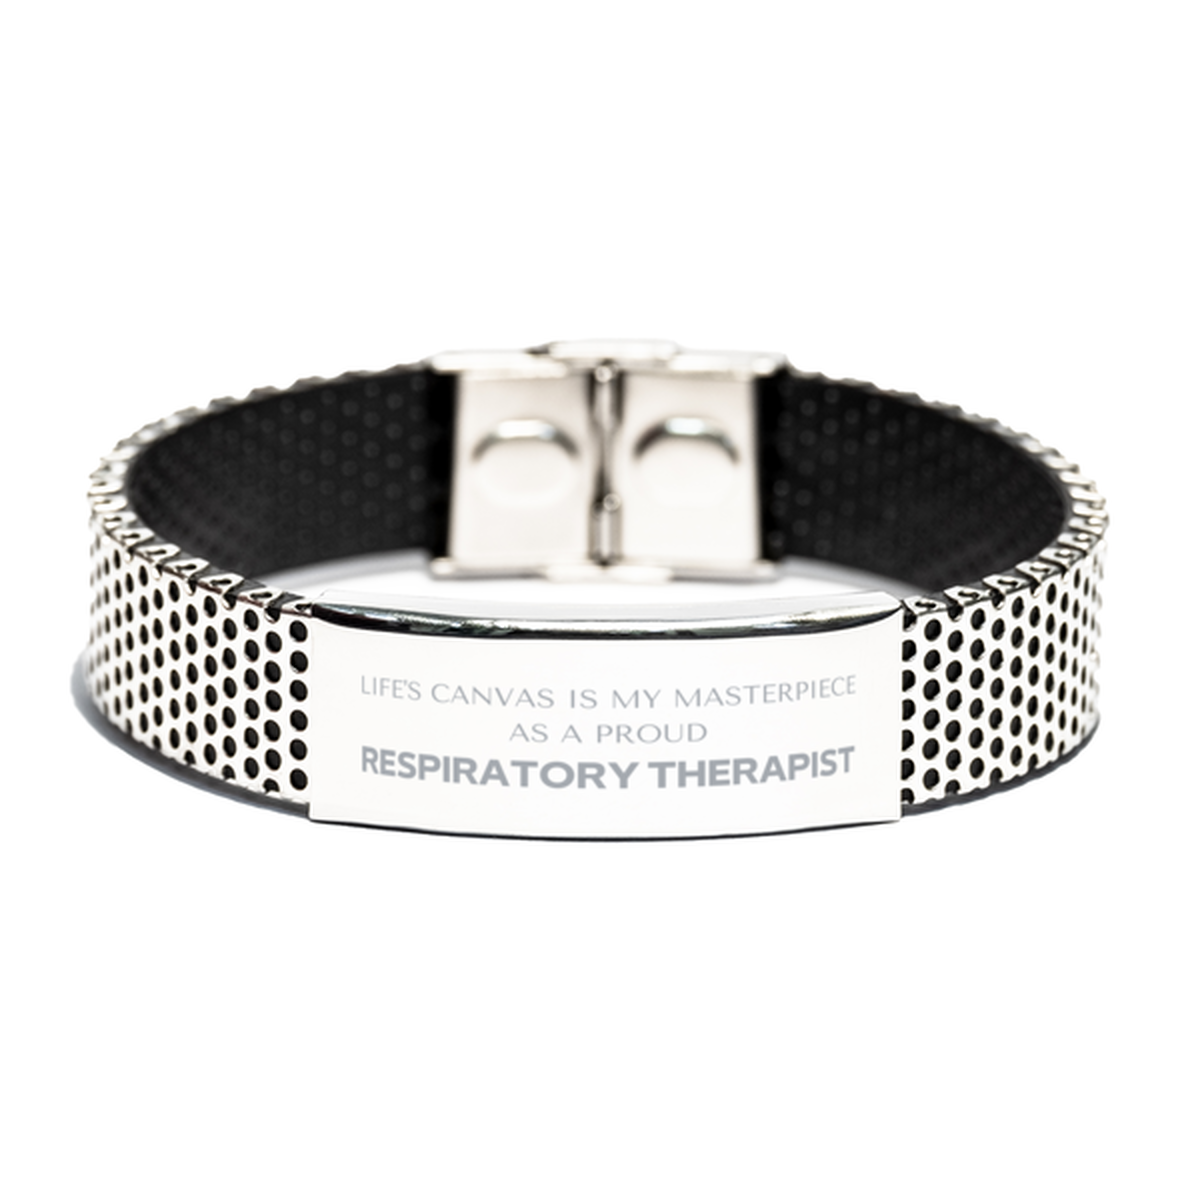 Proud Respiratory Therapist Gifts, Life's canvas is my masterpiece, Epic Birthday Christmas Unique Stainless Steel Bracelet For Respiratory Therapist, Coworkers, Men, Women, Friends